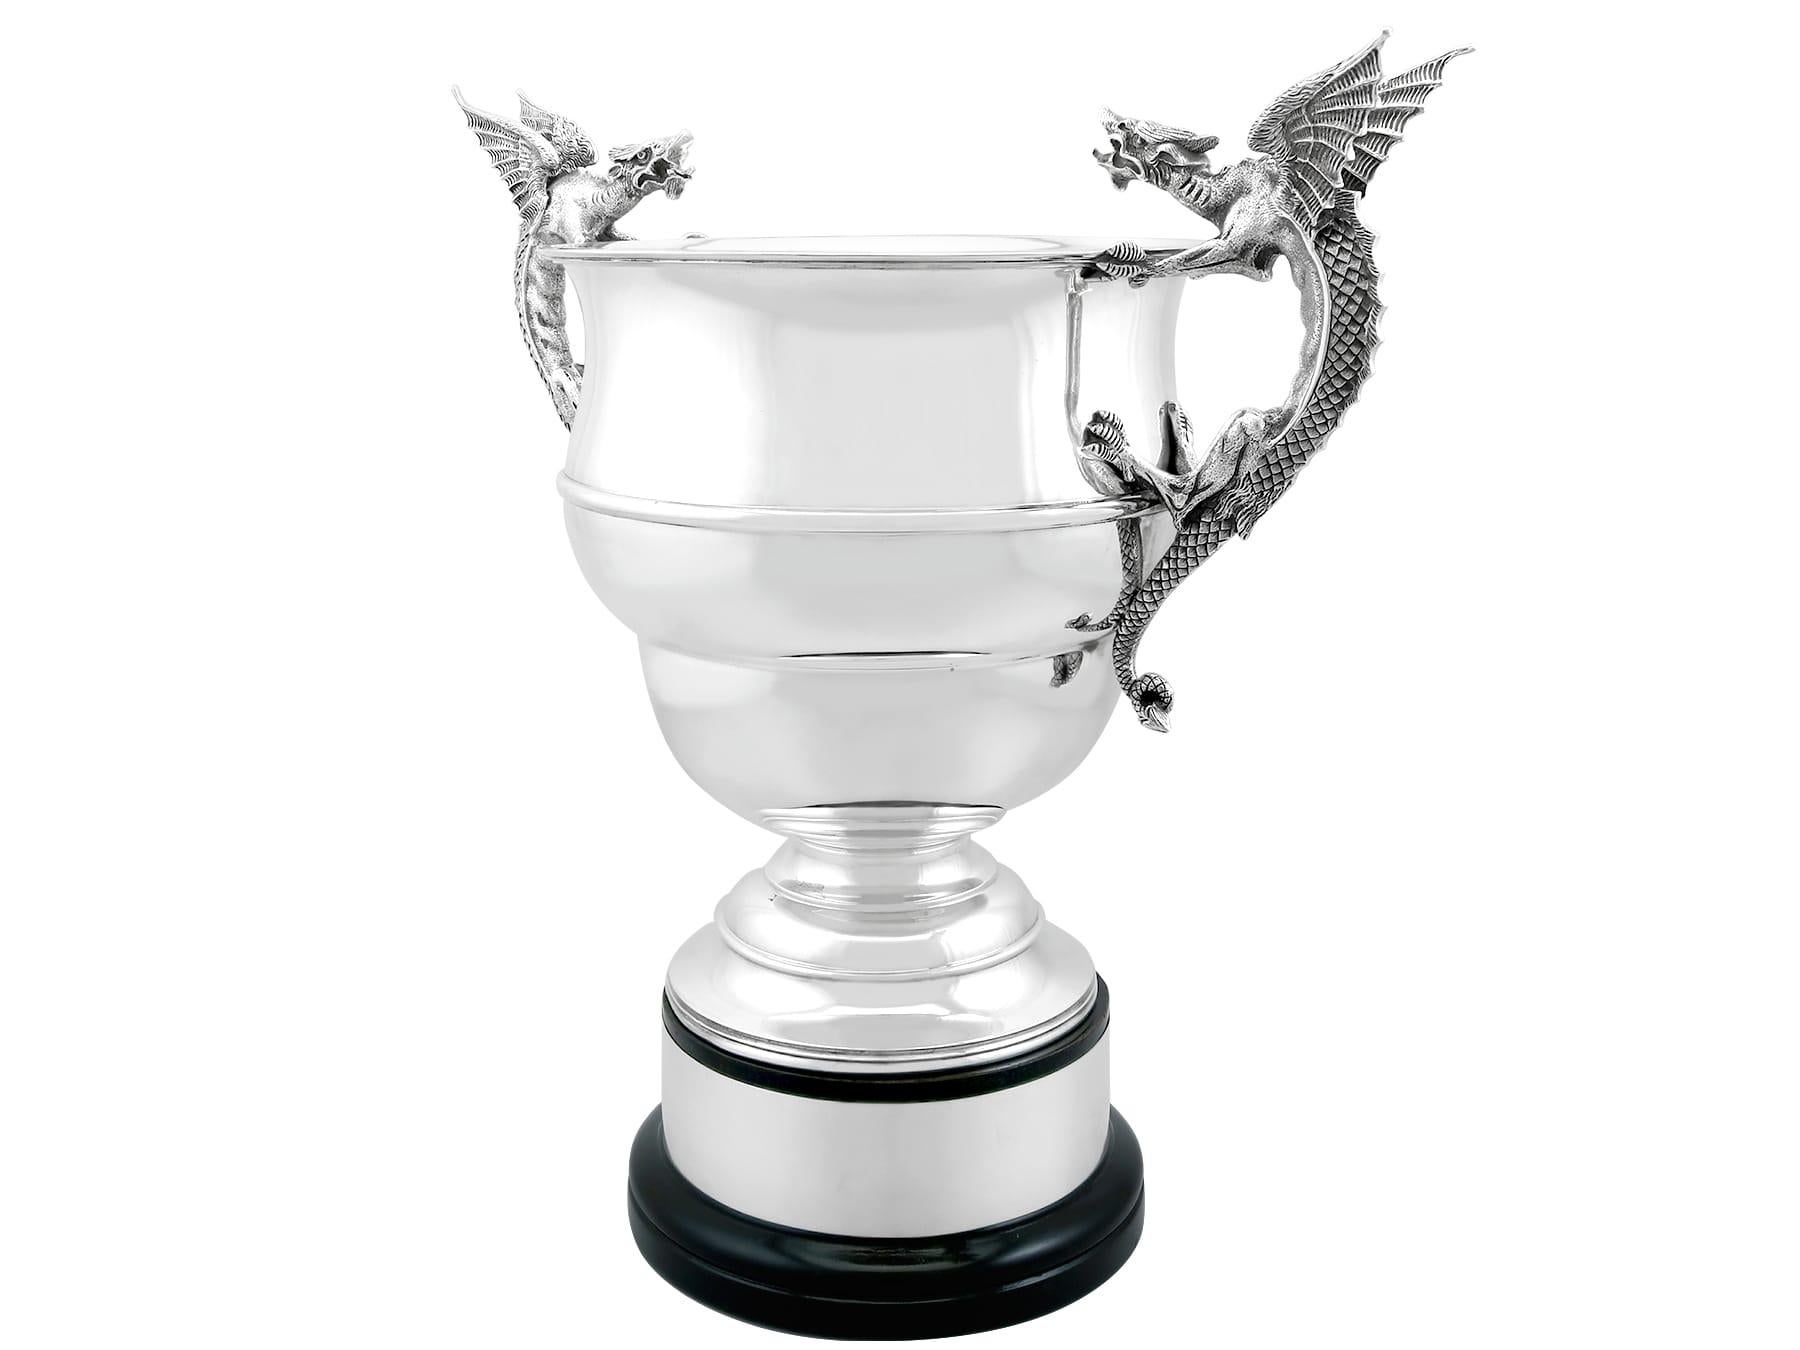 British Antique Edwardian Sterling Silver Presentation Cup and Plinth (1906) For Sale